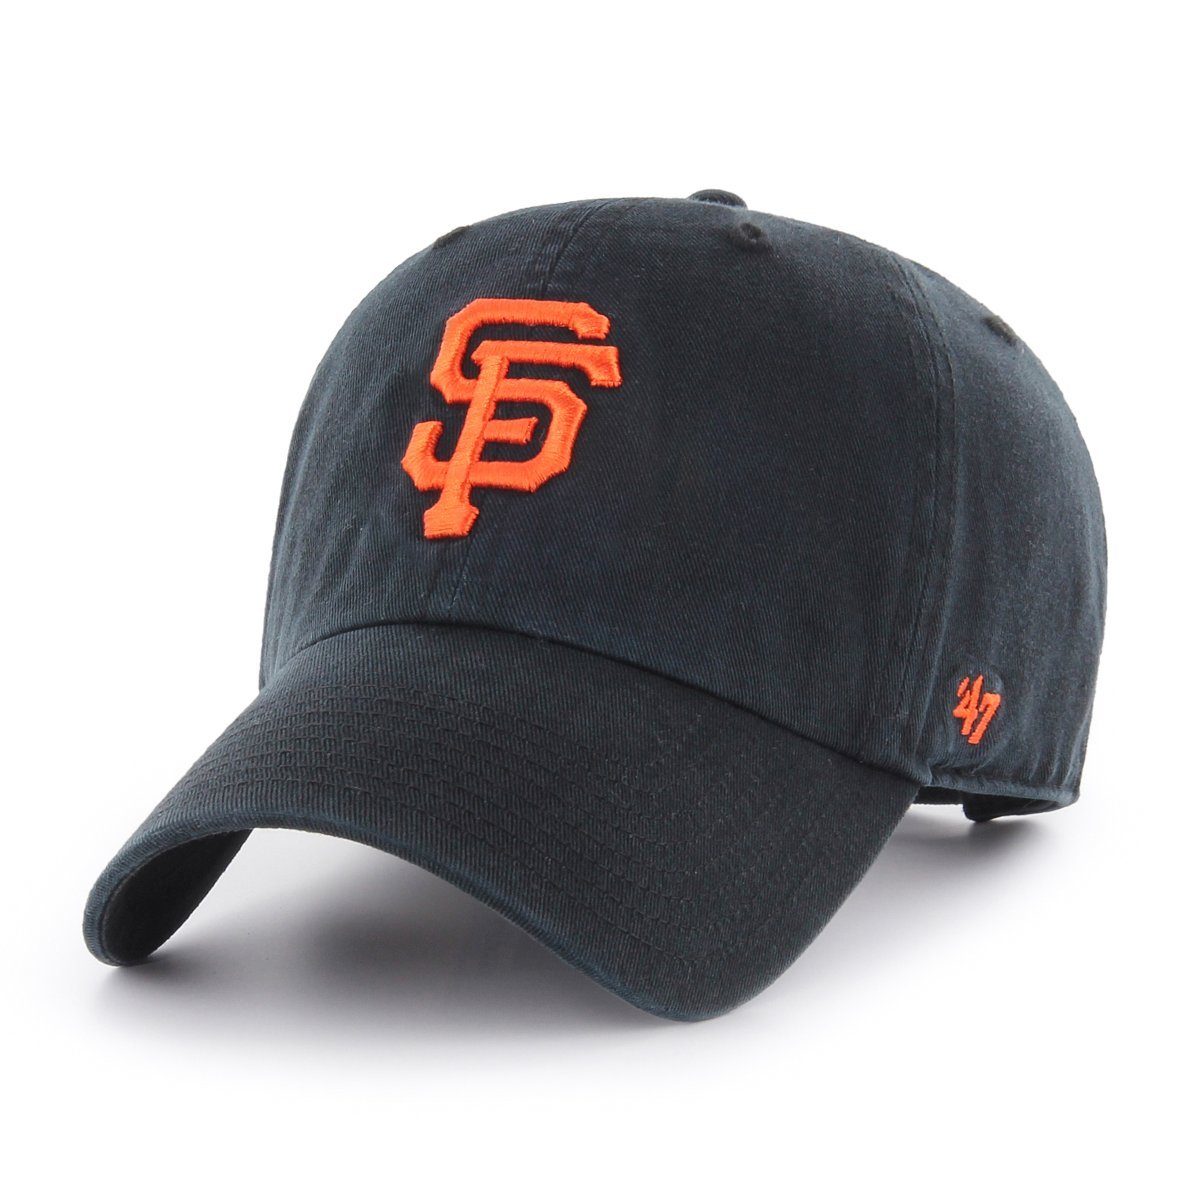 '47 Brand Trucker Cap Relaxed Fit MLB San Francisco Giants